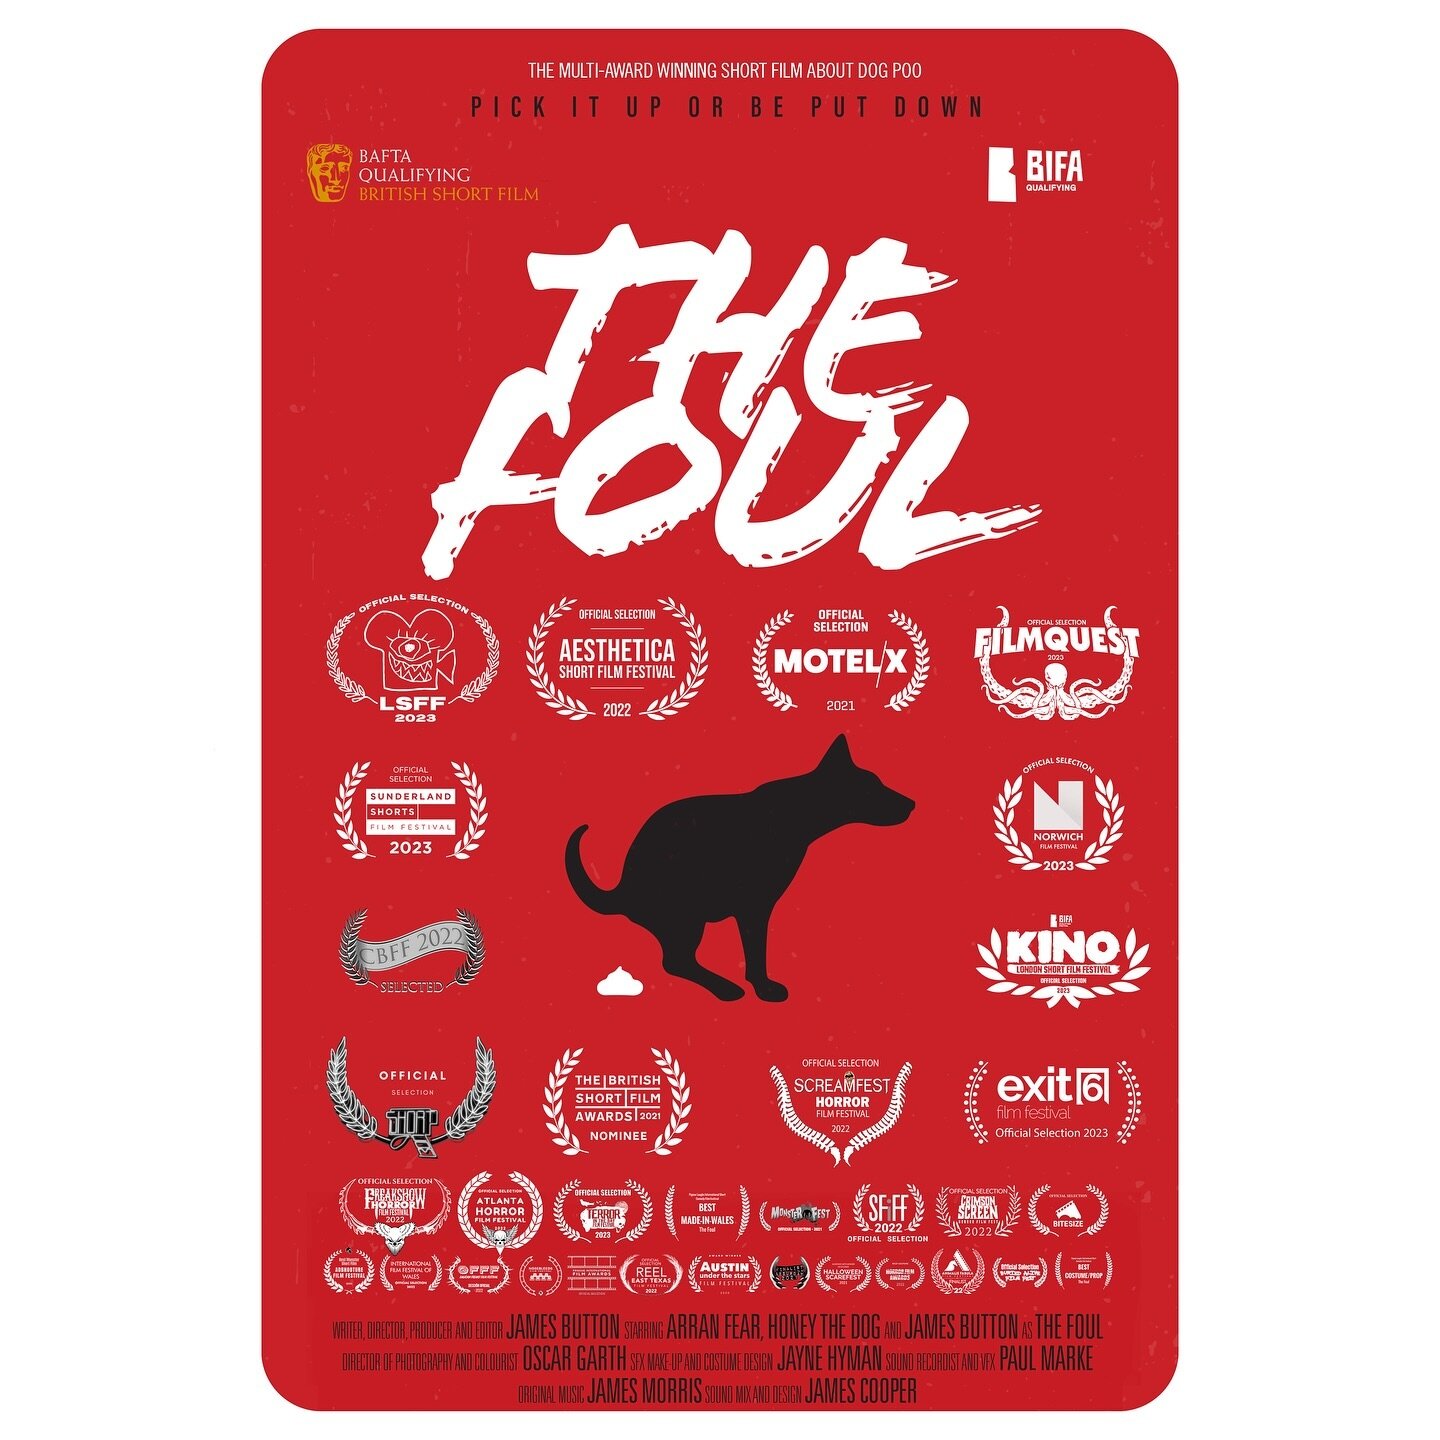 THE FOUL has also finished its fun quest across worldwide film festivals spreading the word about how important it is to pick up after your dog&hellip;or else 💩 

It plopped its last at the mad @filmquest in Utah last month then @norwichfilmfestival